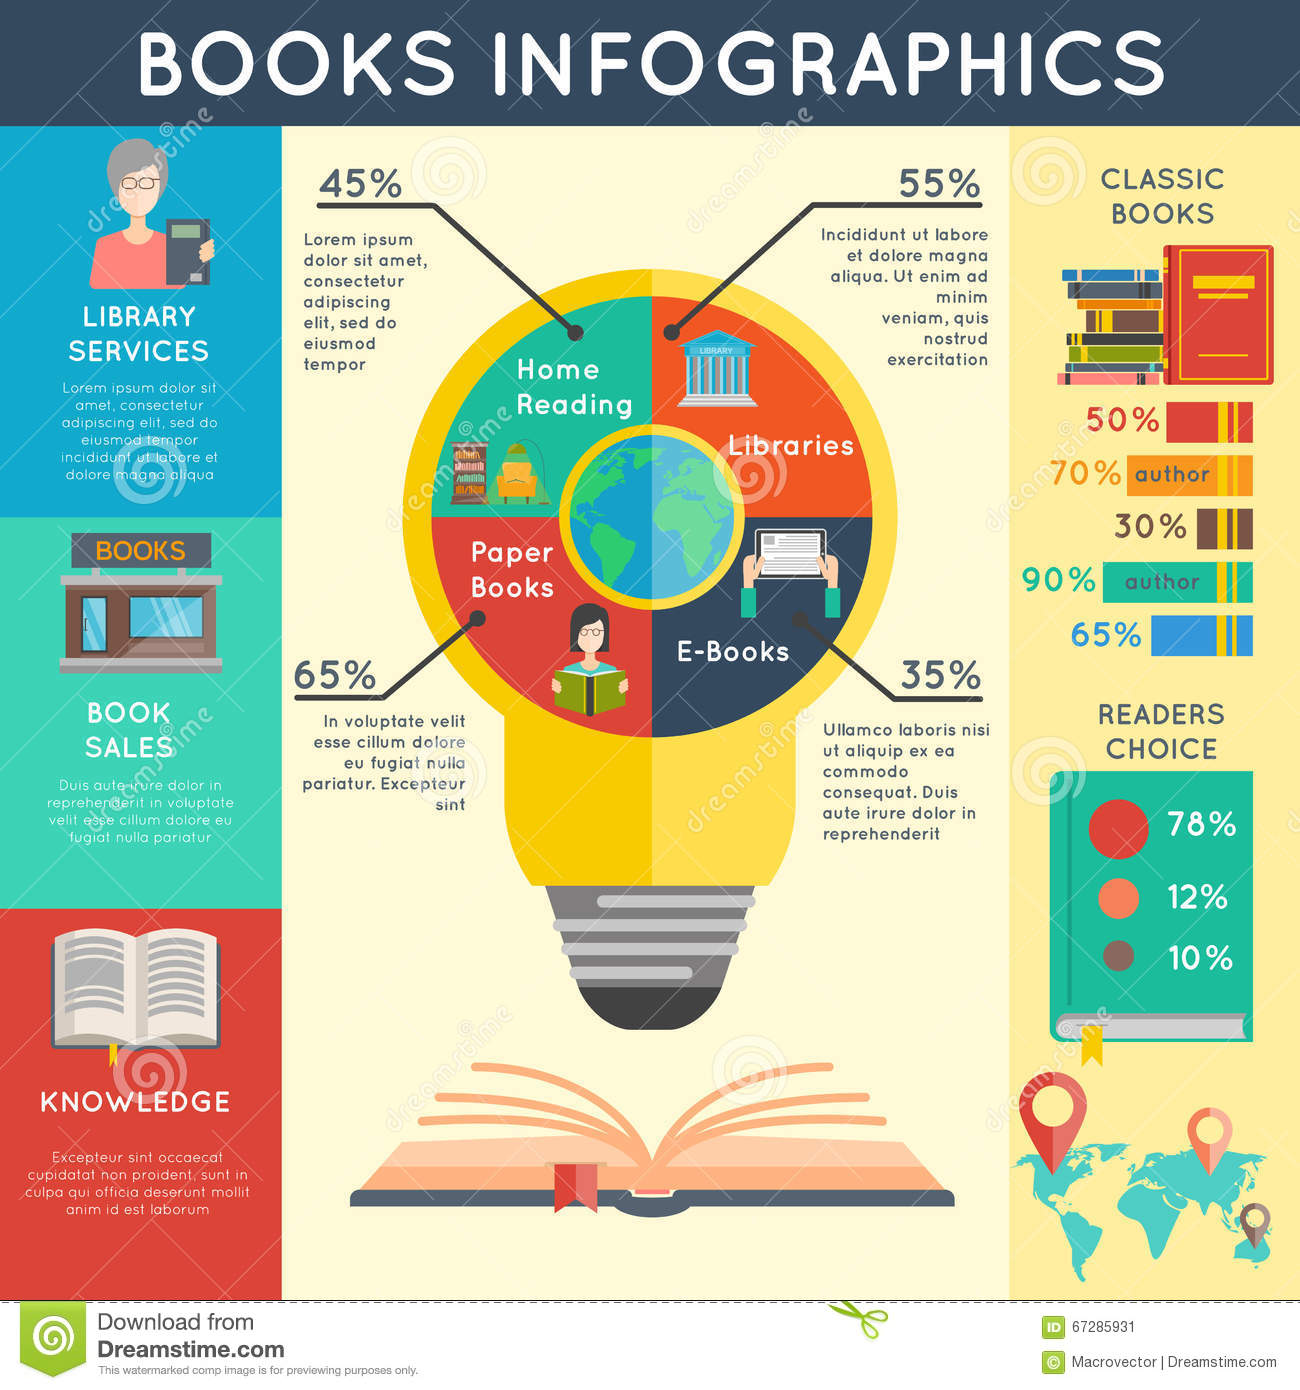 How childrens books are made (infographic) | Infographic illustration, Infographic, Infographic ...